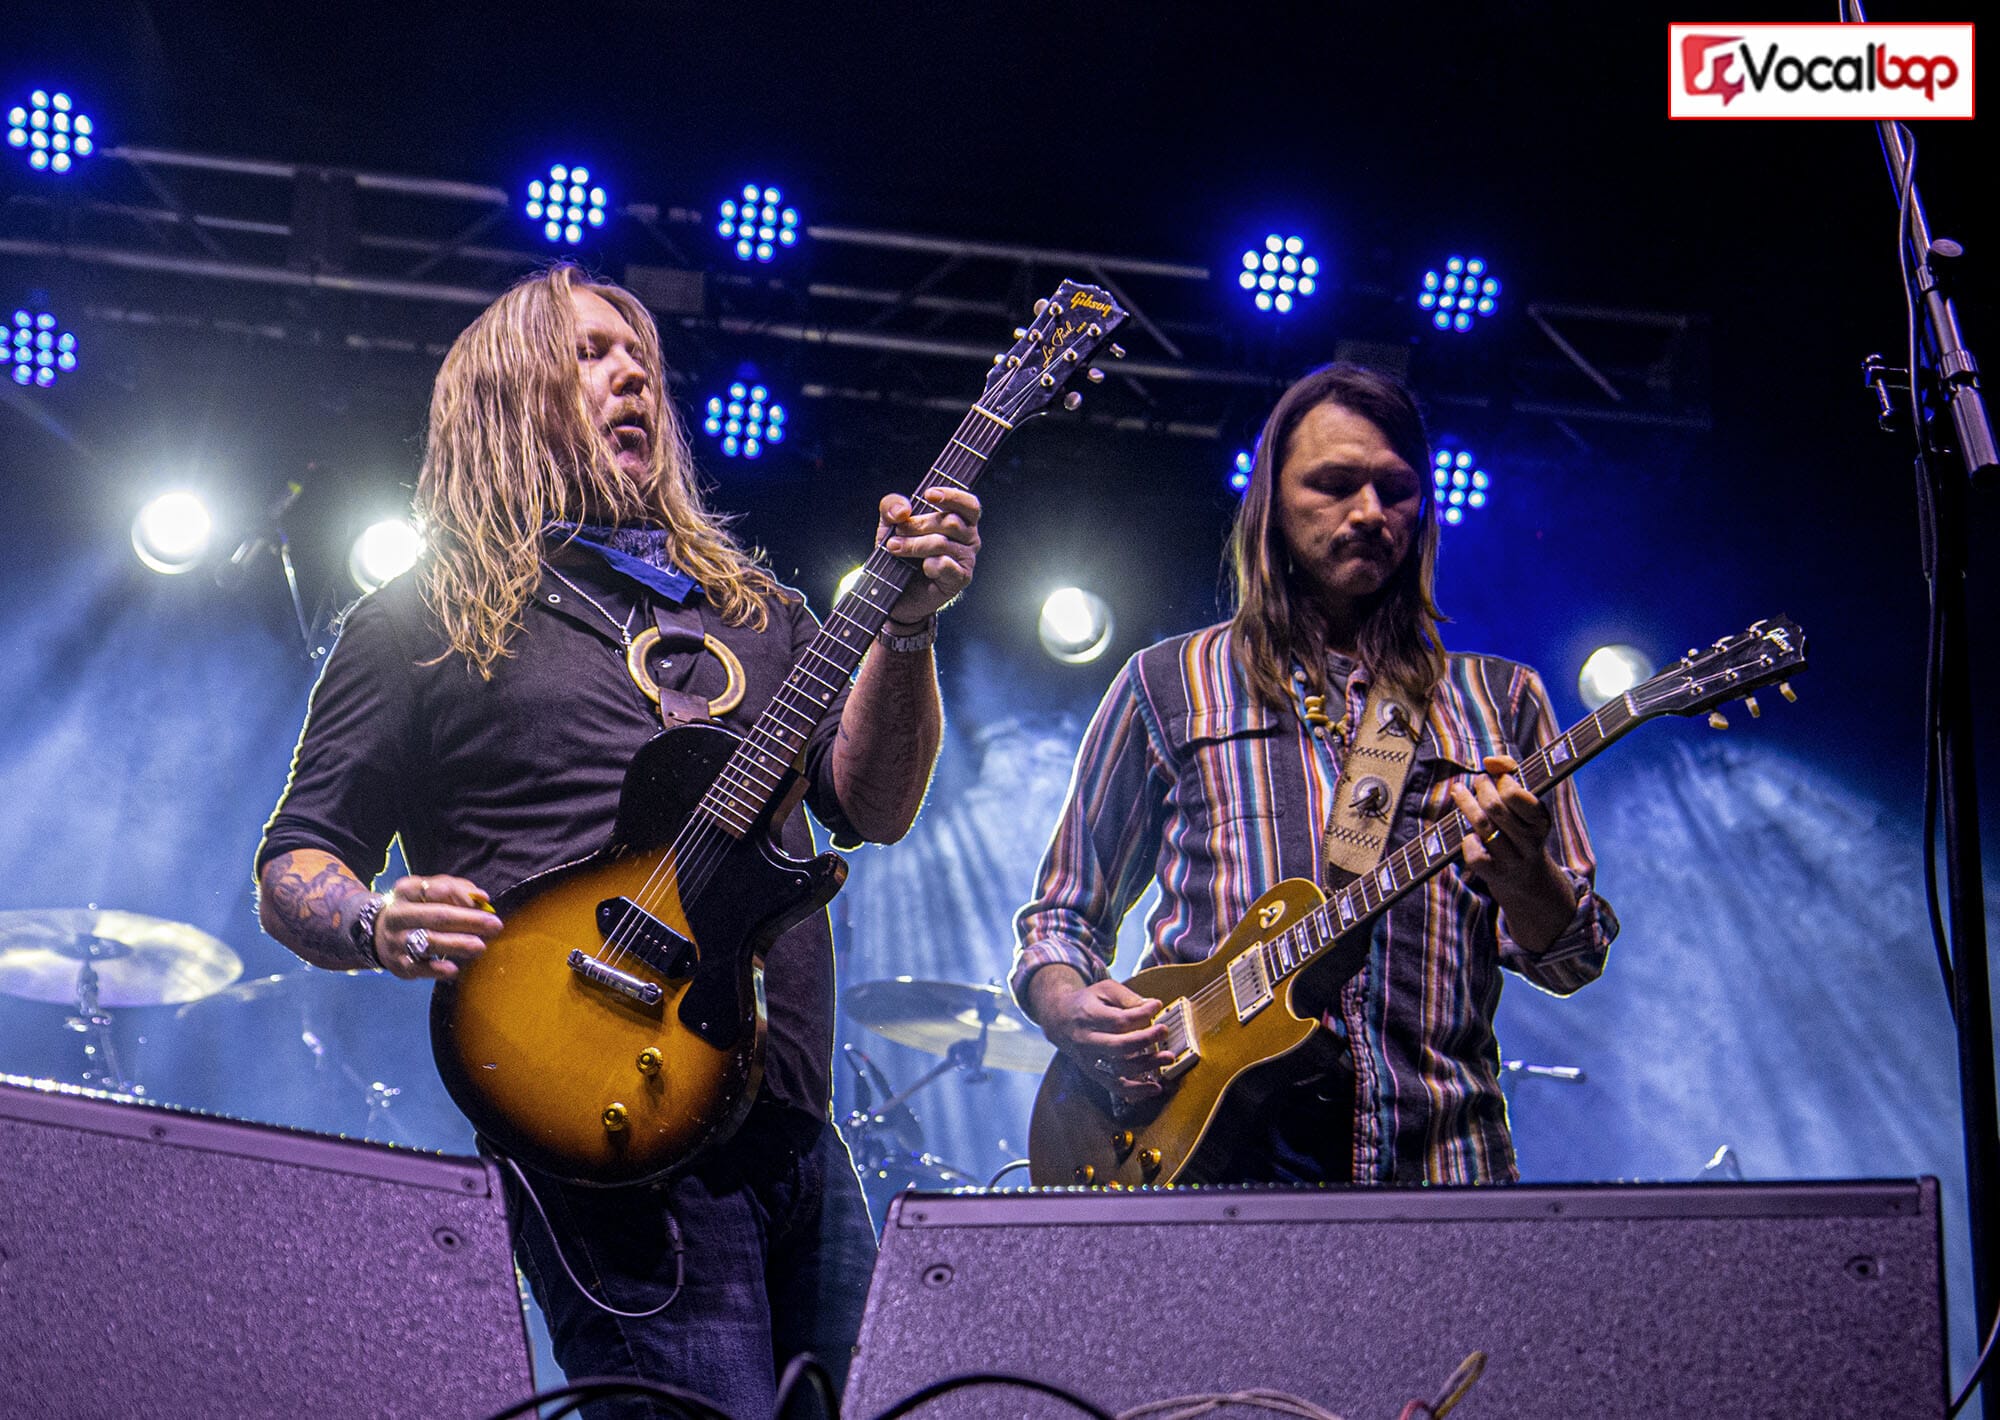 The Allman Betts Band 'Allman Family Revival' Tour 2021 How To Get